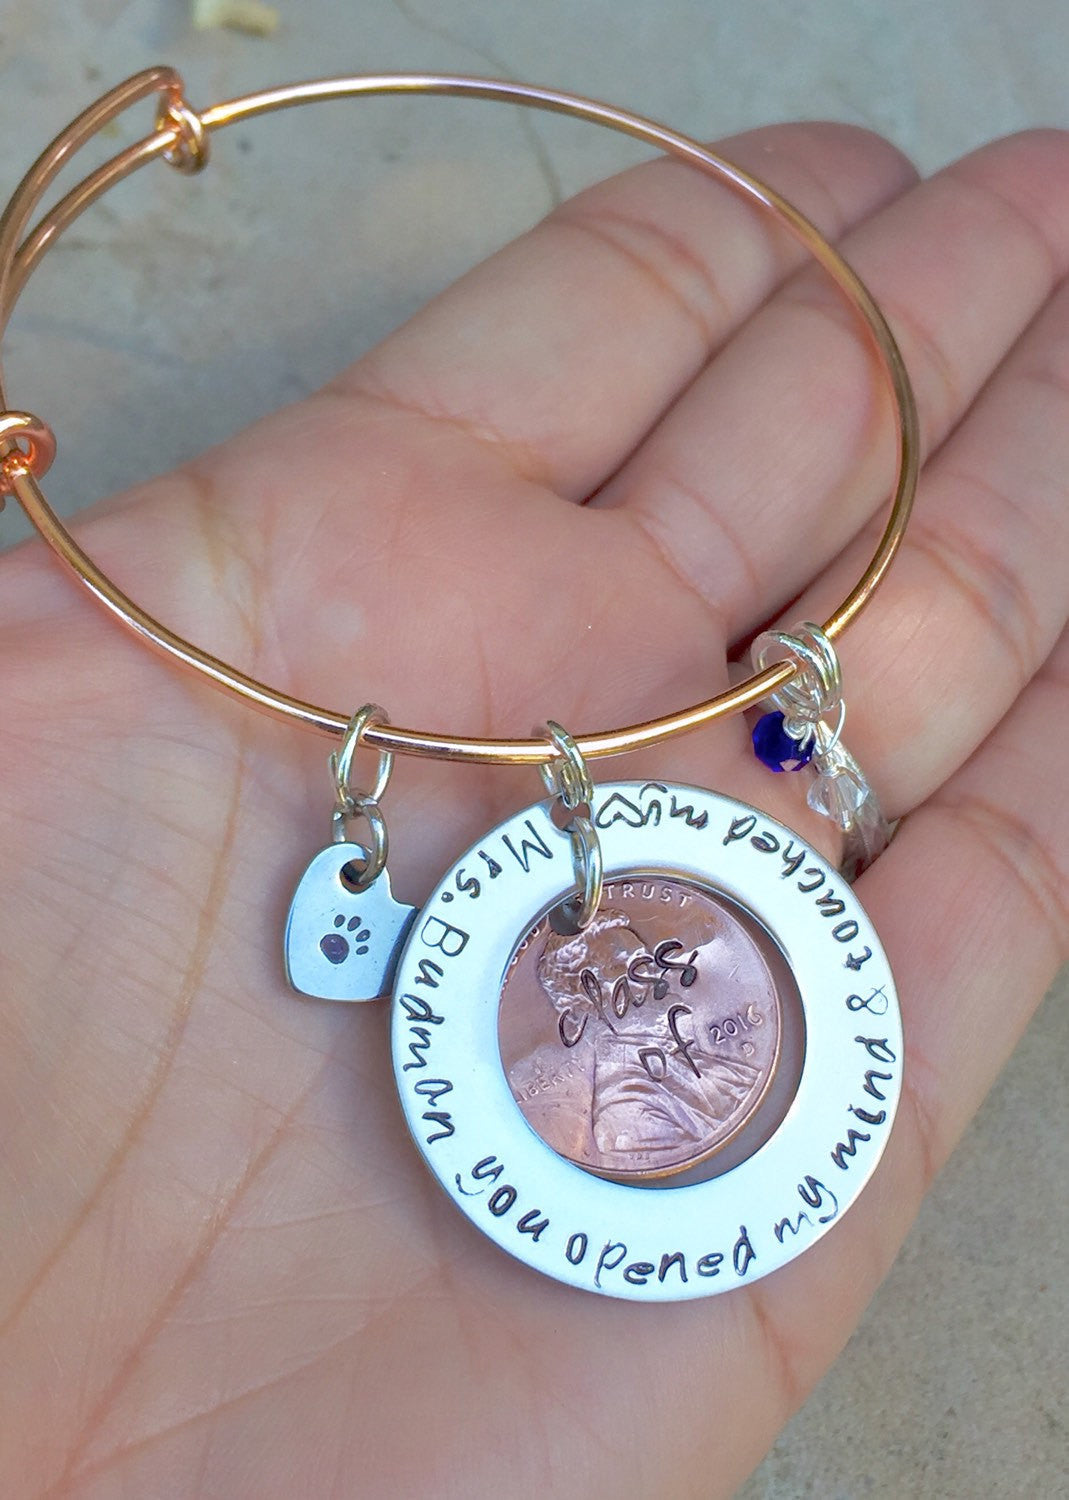 Teacher Gifts, Teacher Bracelet, Teacher Thank You Gifts - Natashaaloha, jewelry, bracelets, necklace, keychains, fishing lures, gifts for men, charms, personalized, 